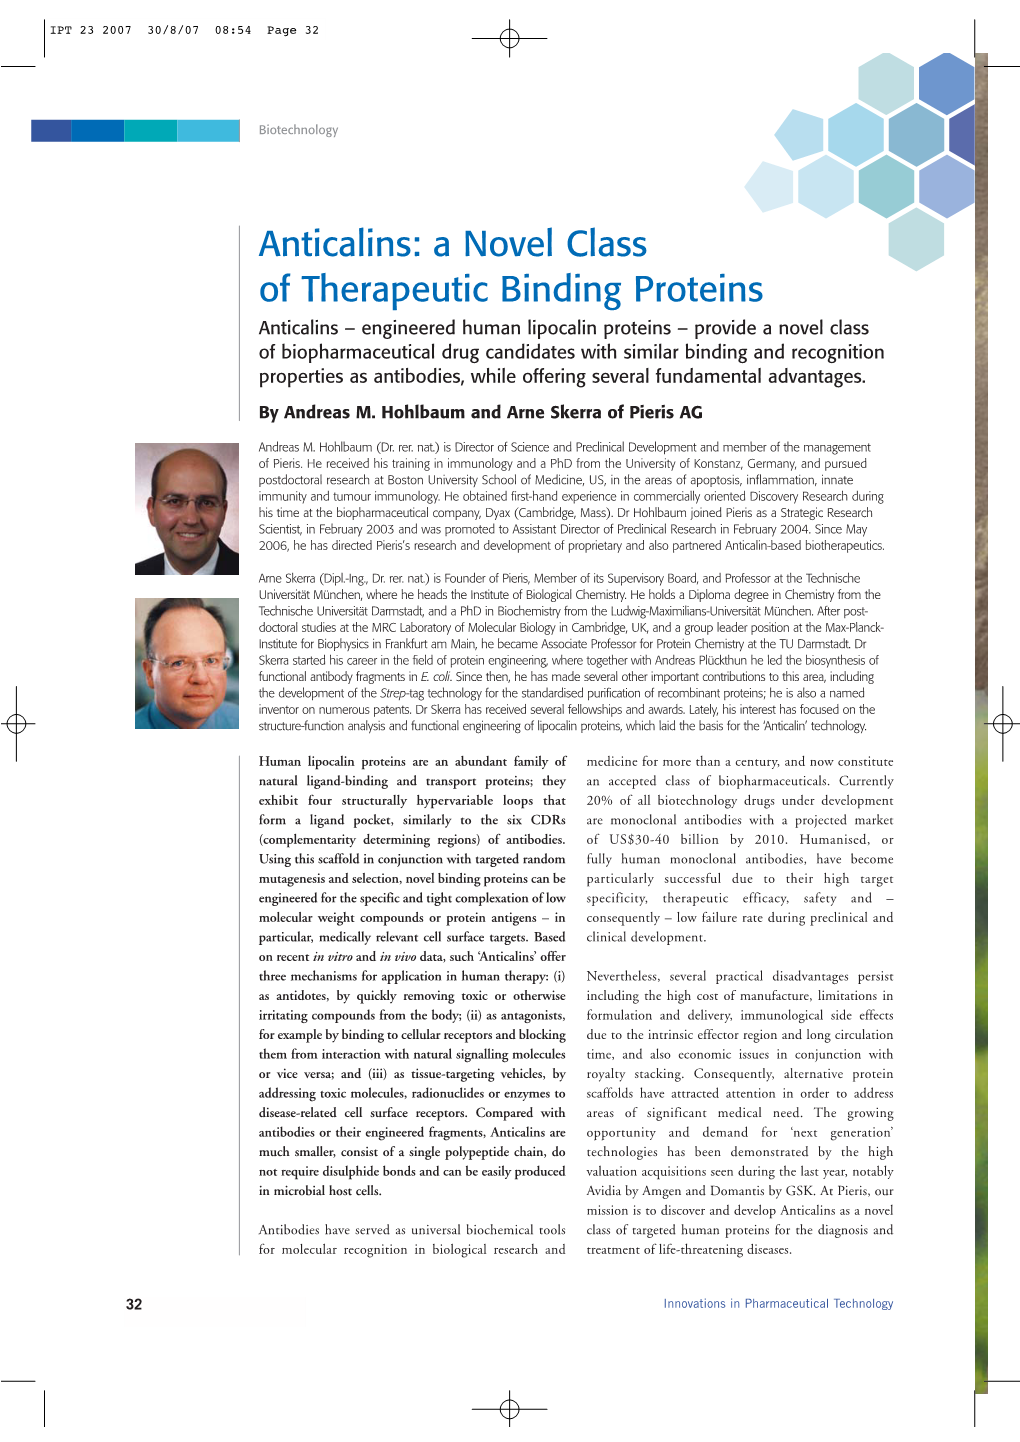 Anticalins: a Novel Class of Therapeutic Binding Proteins